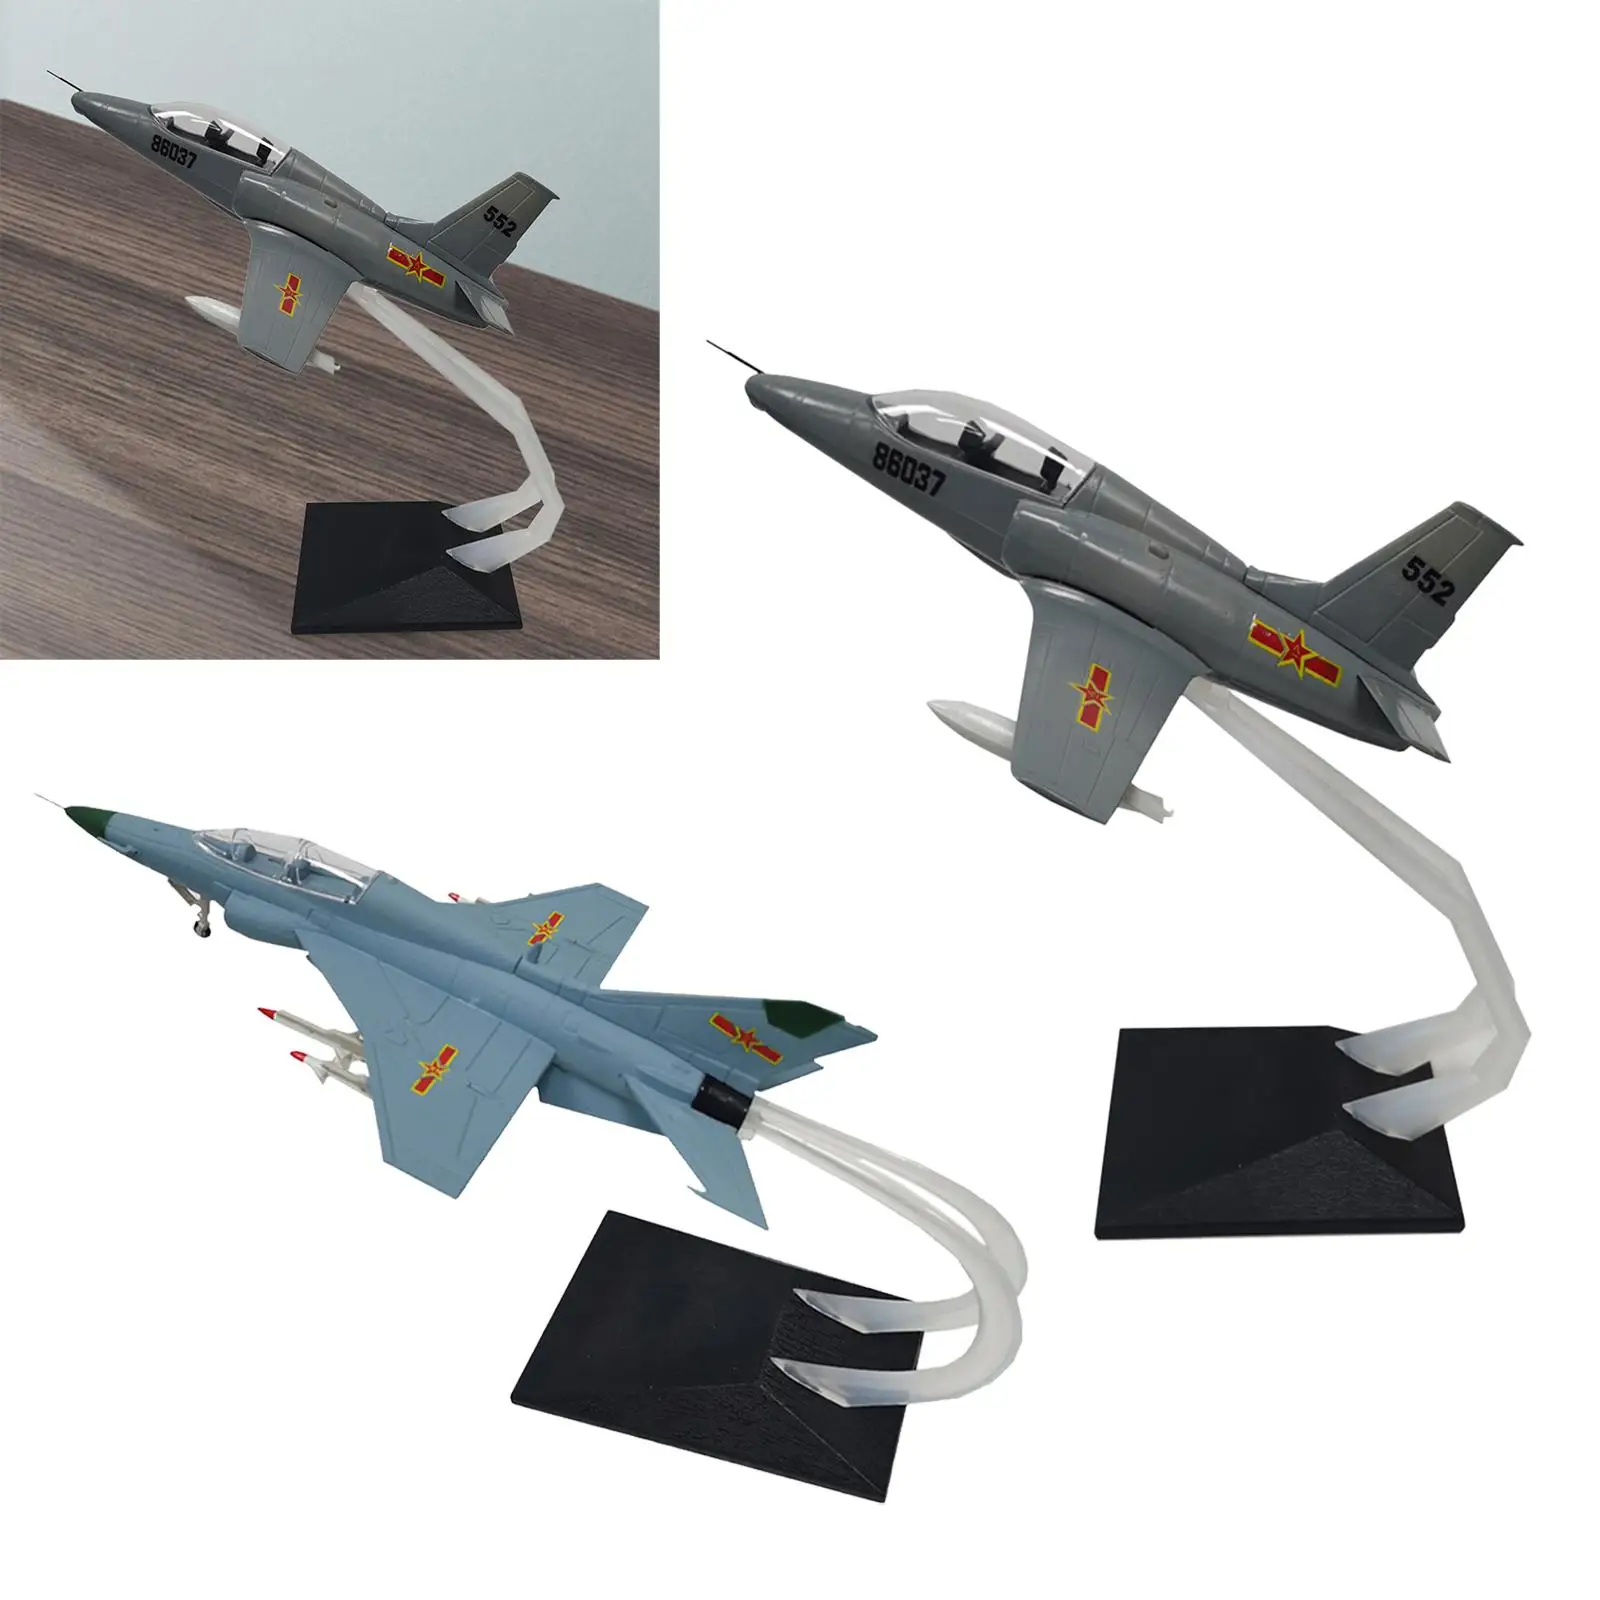 1:48 Scale Diecast Model Planes Souvenir Collection Airplane Model Fighter Jet Model for Bookshelf Cafe Office Home